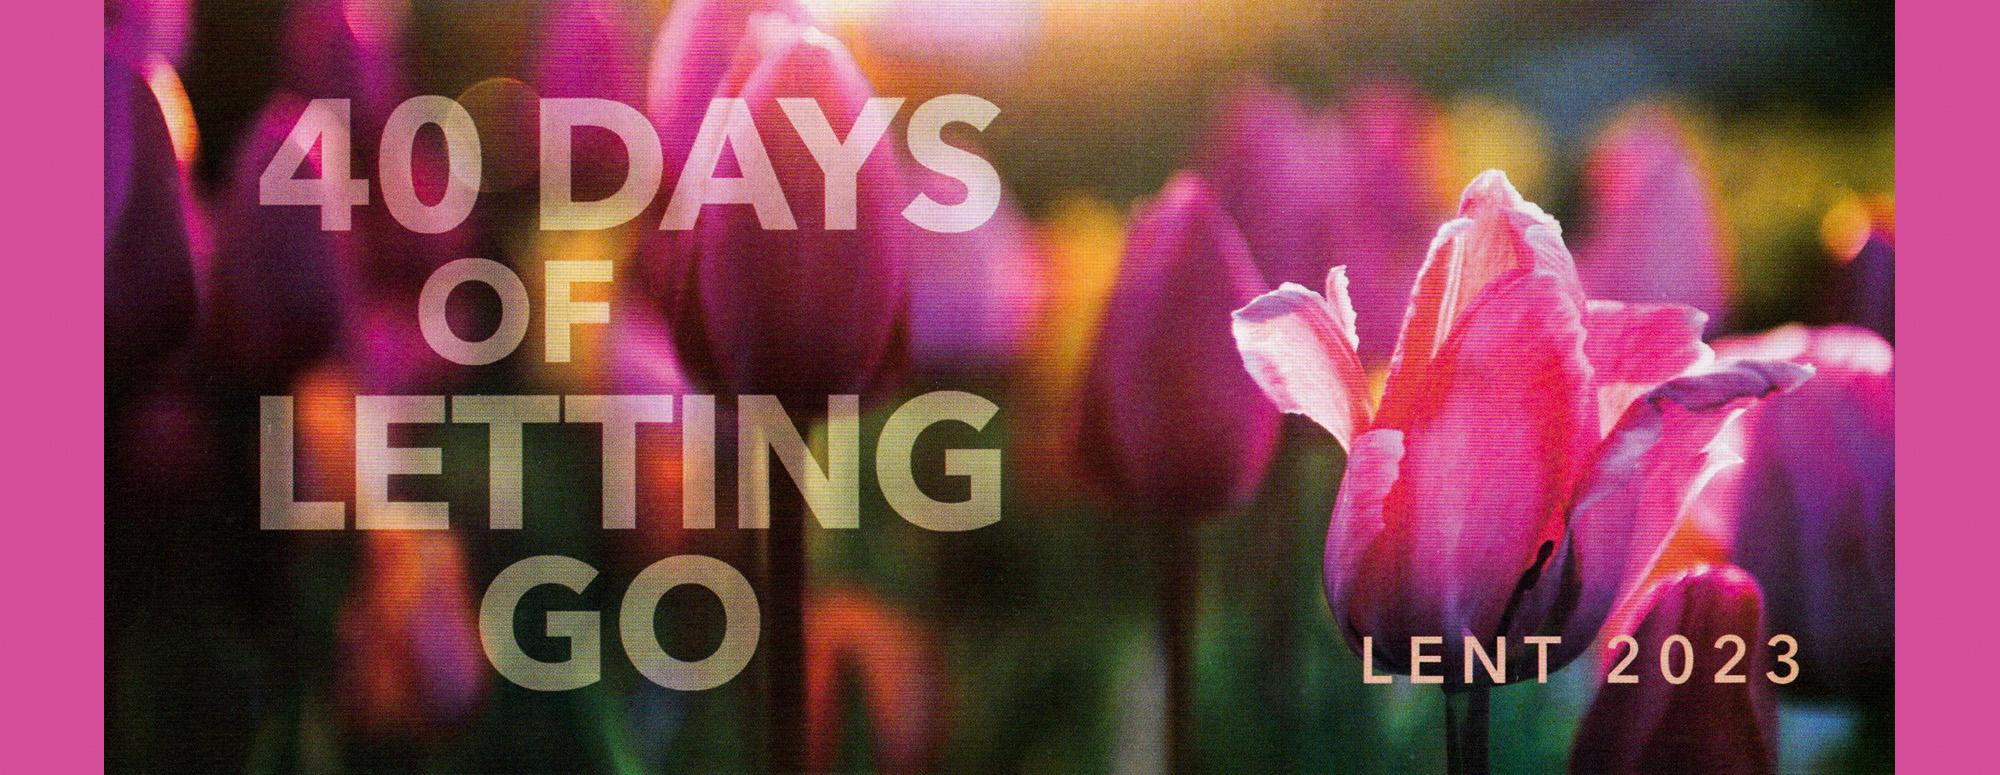 40 Days of Letting Go - Lent 2023